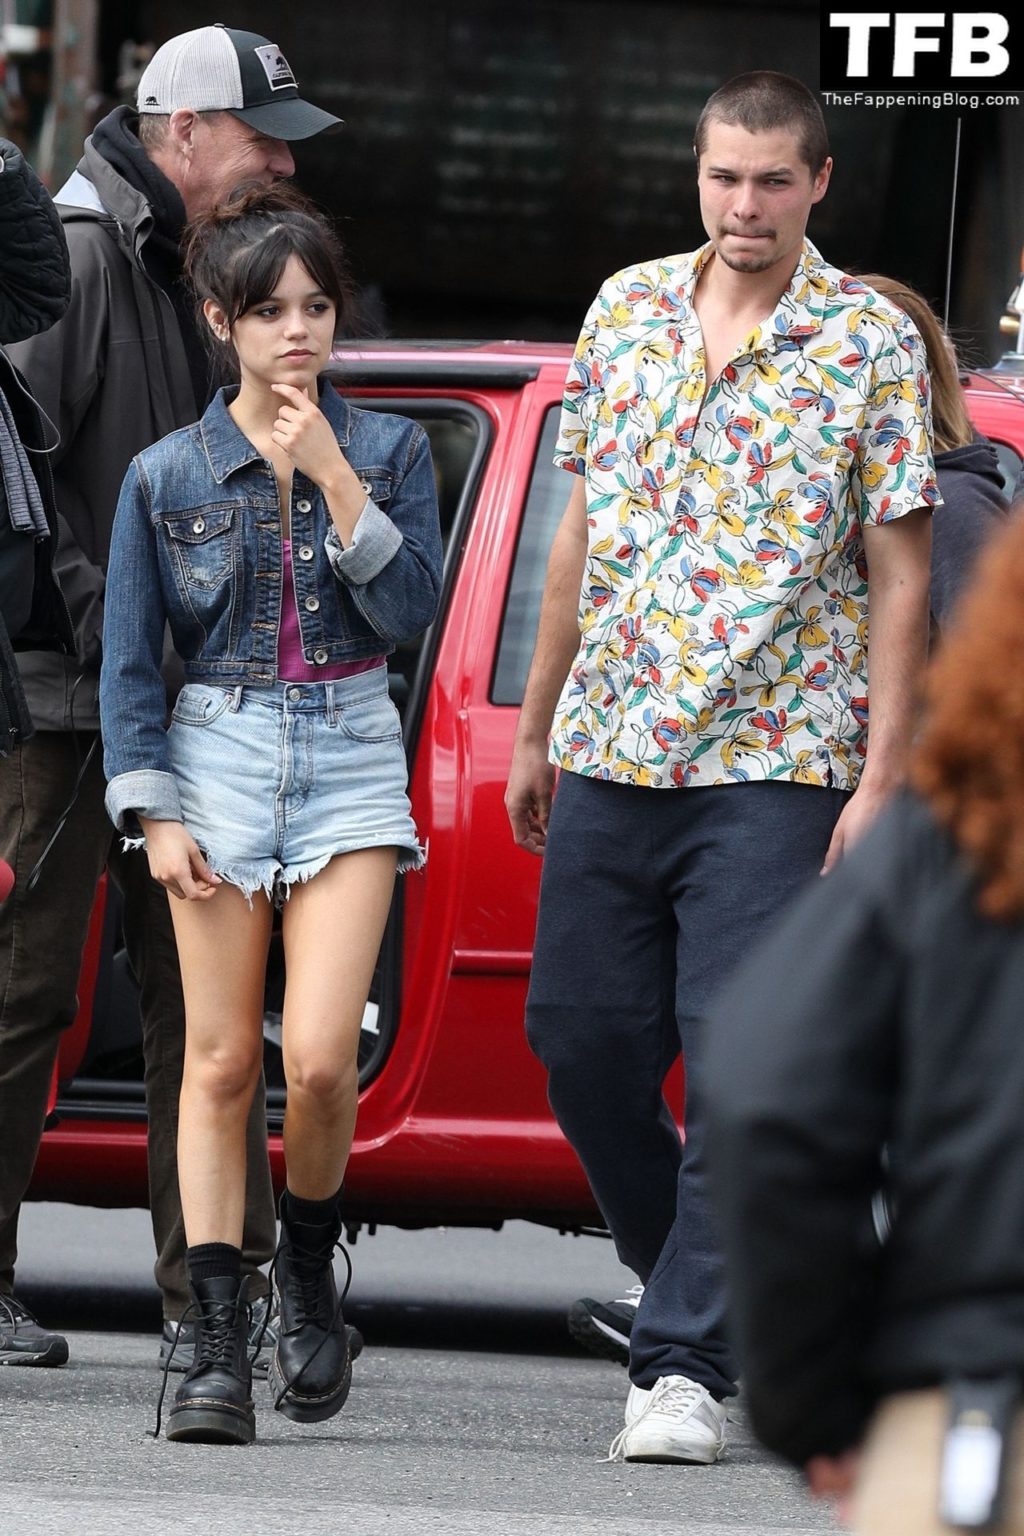 Jenna Ortega Sexy The Fappening Blog 7 1024x1536 - Leggy Jenna Ortega is Spotted in Short Shorts on the Set of “Finest Kind” (24 Photos)